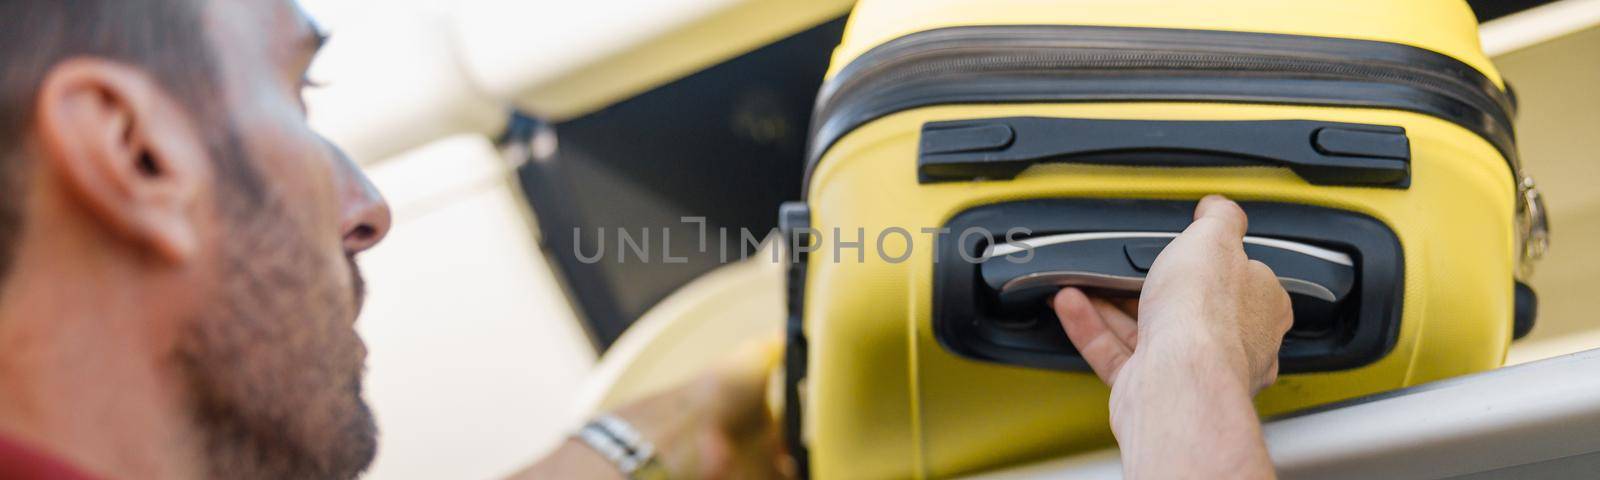 Man pulling out hand luggage from compartment while traveling by plane by Yaroslav_astakhov